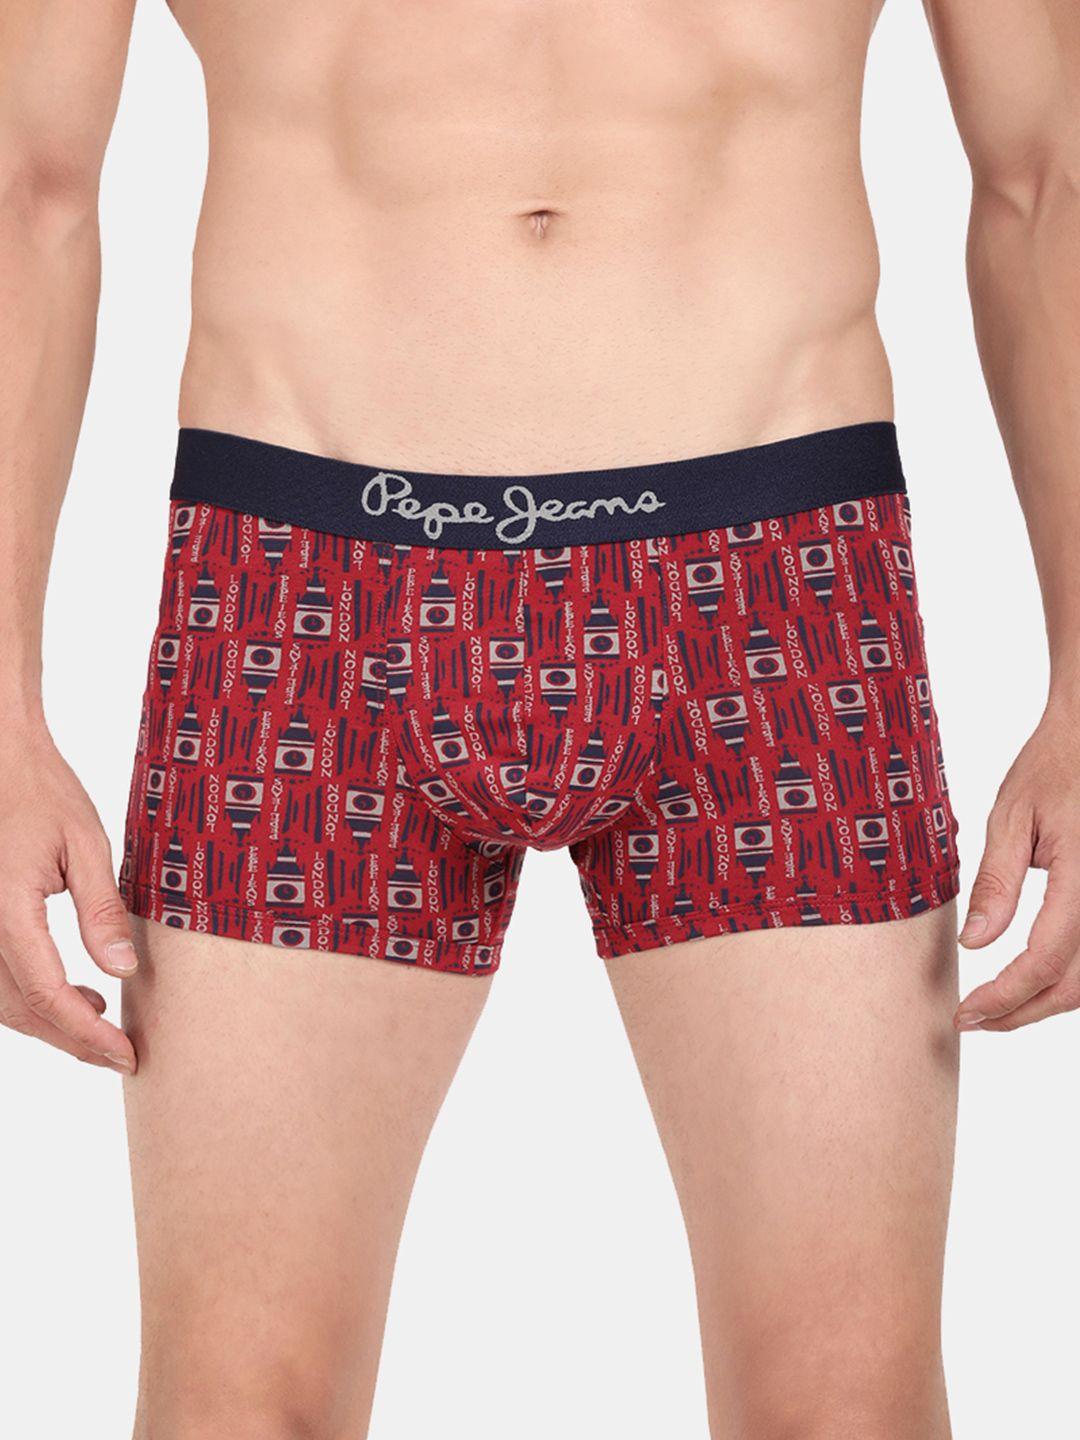 pepe-jeans-men-red-&-navy-blue-printed-cotton-trunk-clt05-parry-red-aop-s